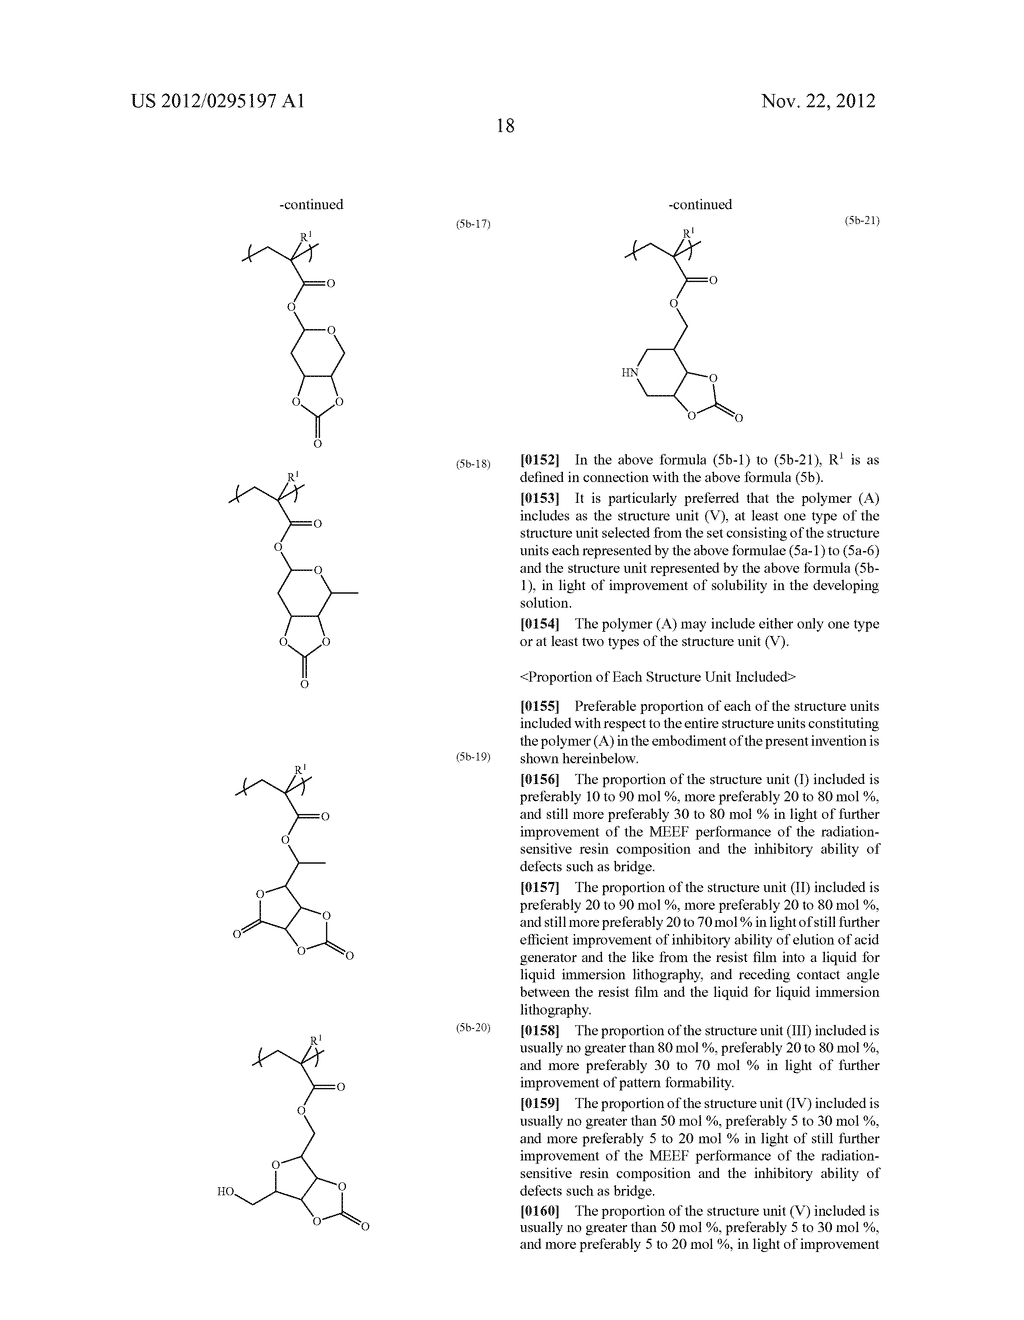 RADIATION-SENSITIVE RESIN COMPOSITION, POLYMER AND METHOD FOR FORMING A     RESIST PATTERN - diagram, schematic, and image 19